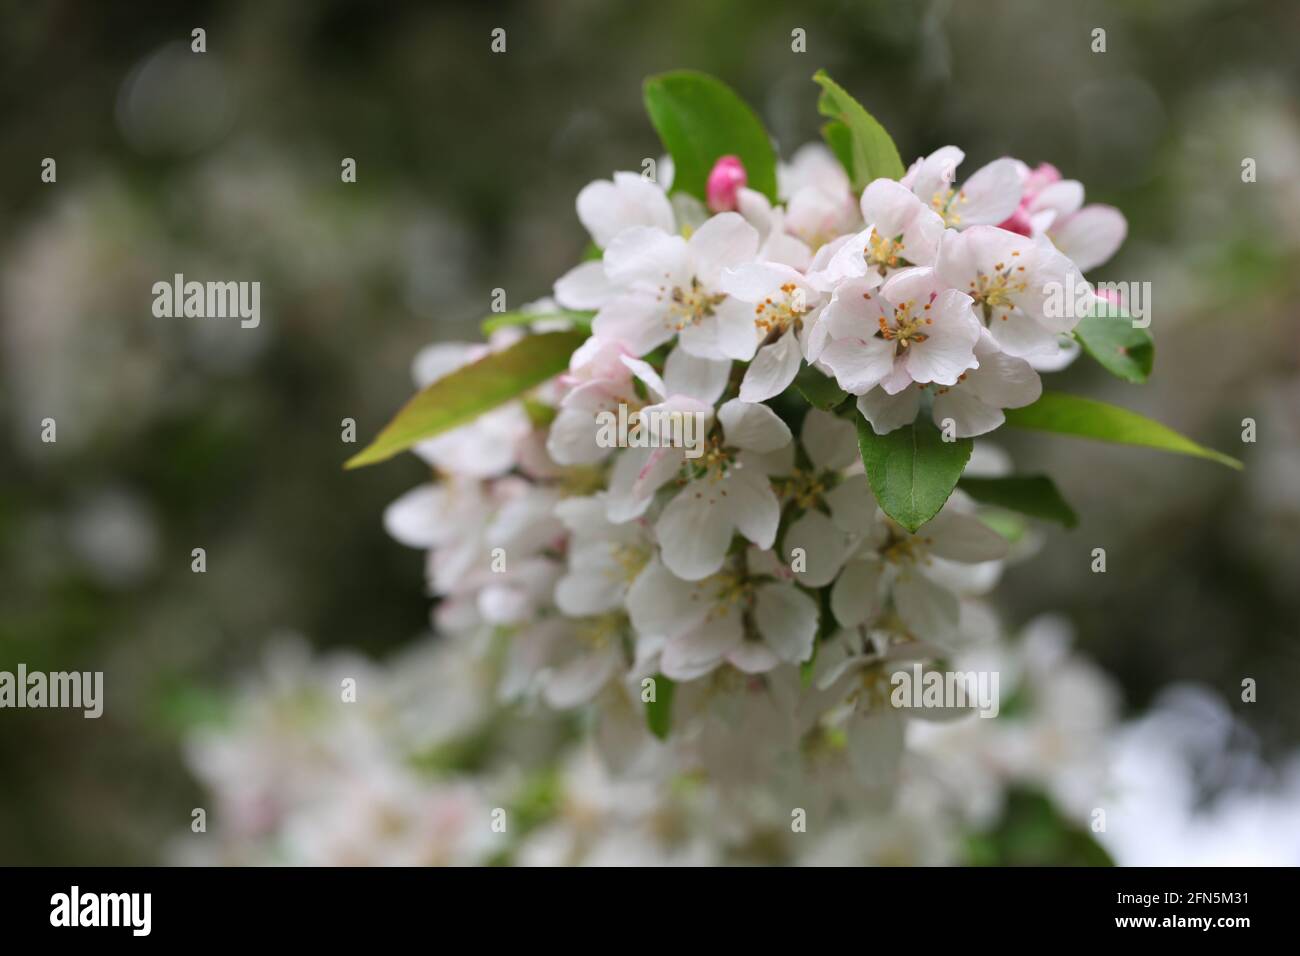 View of Malus 'Winter Gold' apple blossoms, Spring 2021 Stock Photo